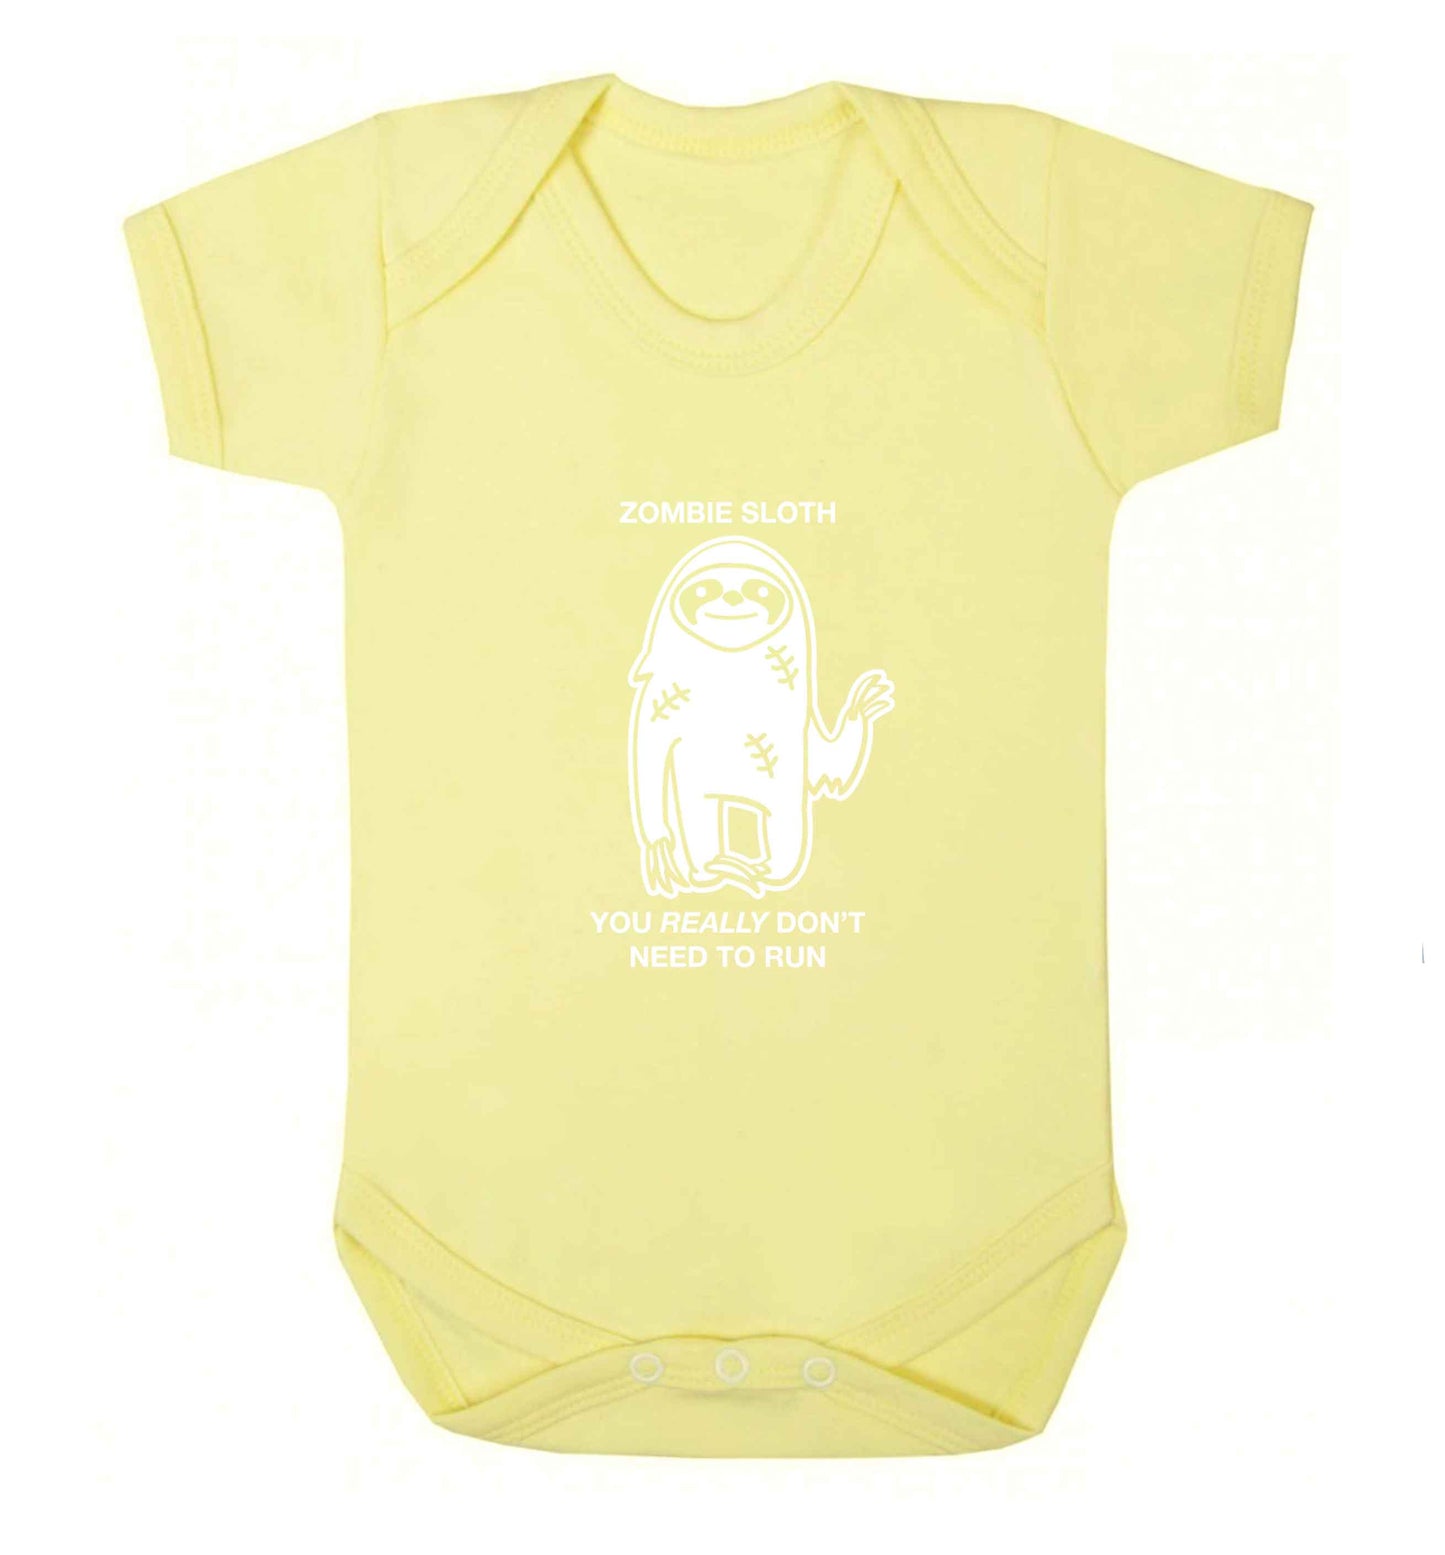 Zombie sloth you really don't need to run baby vest pale yellow 18-24 months